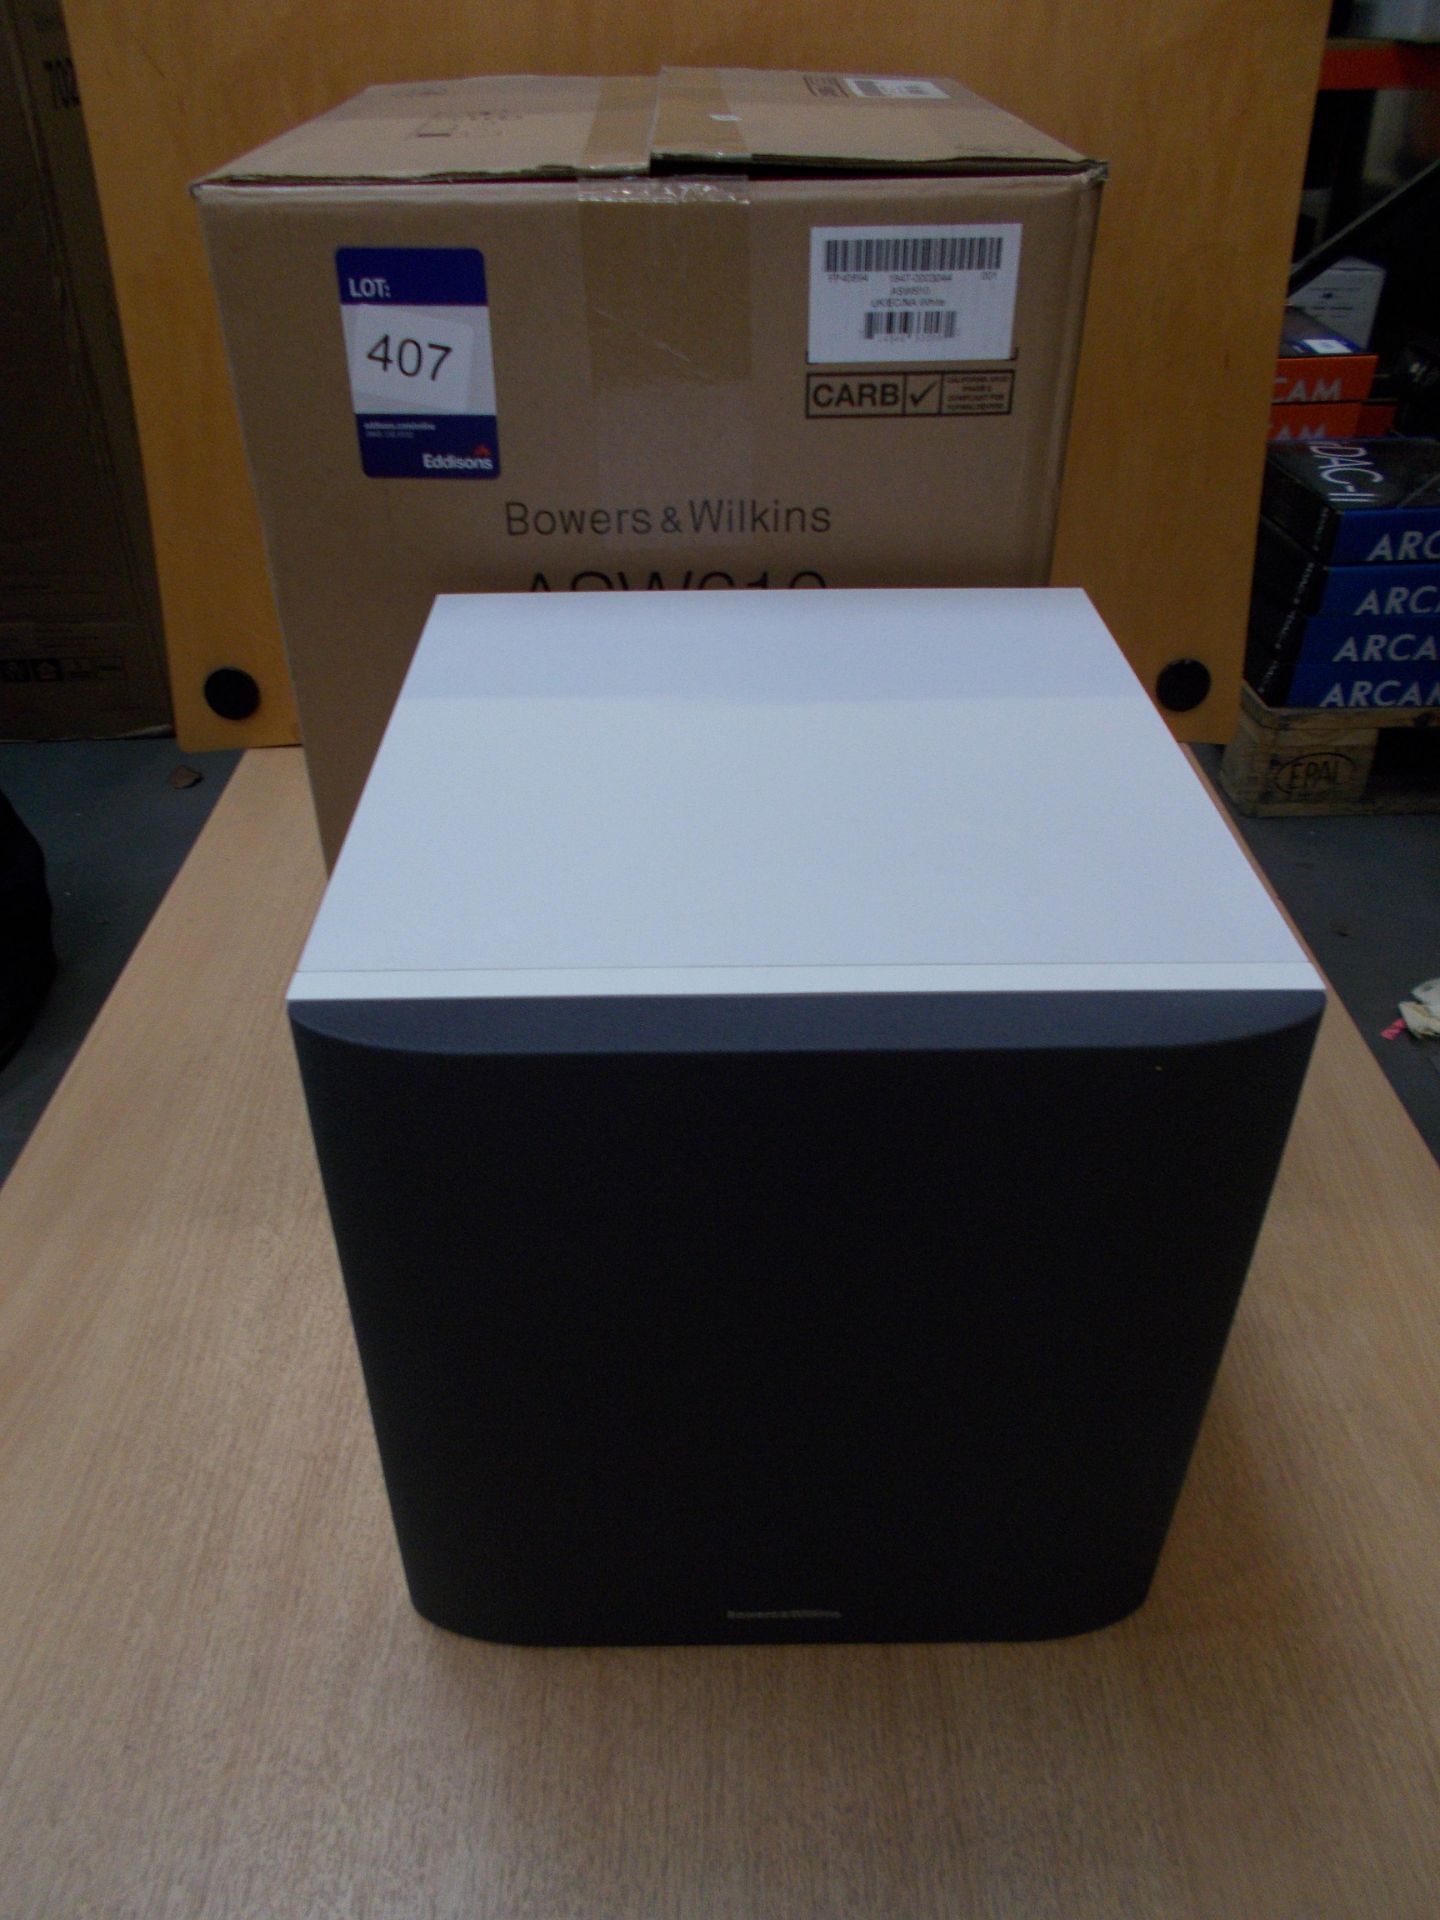 Bowers & Wilkins ASW610 Active Subwoofer, White (on display) – RRP £650